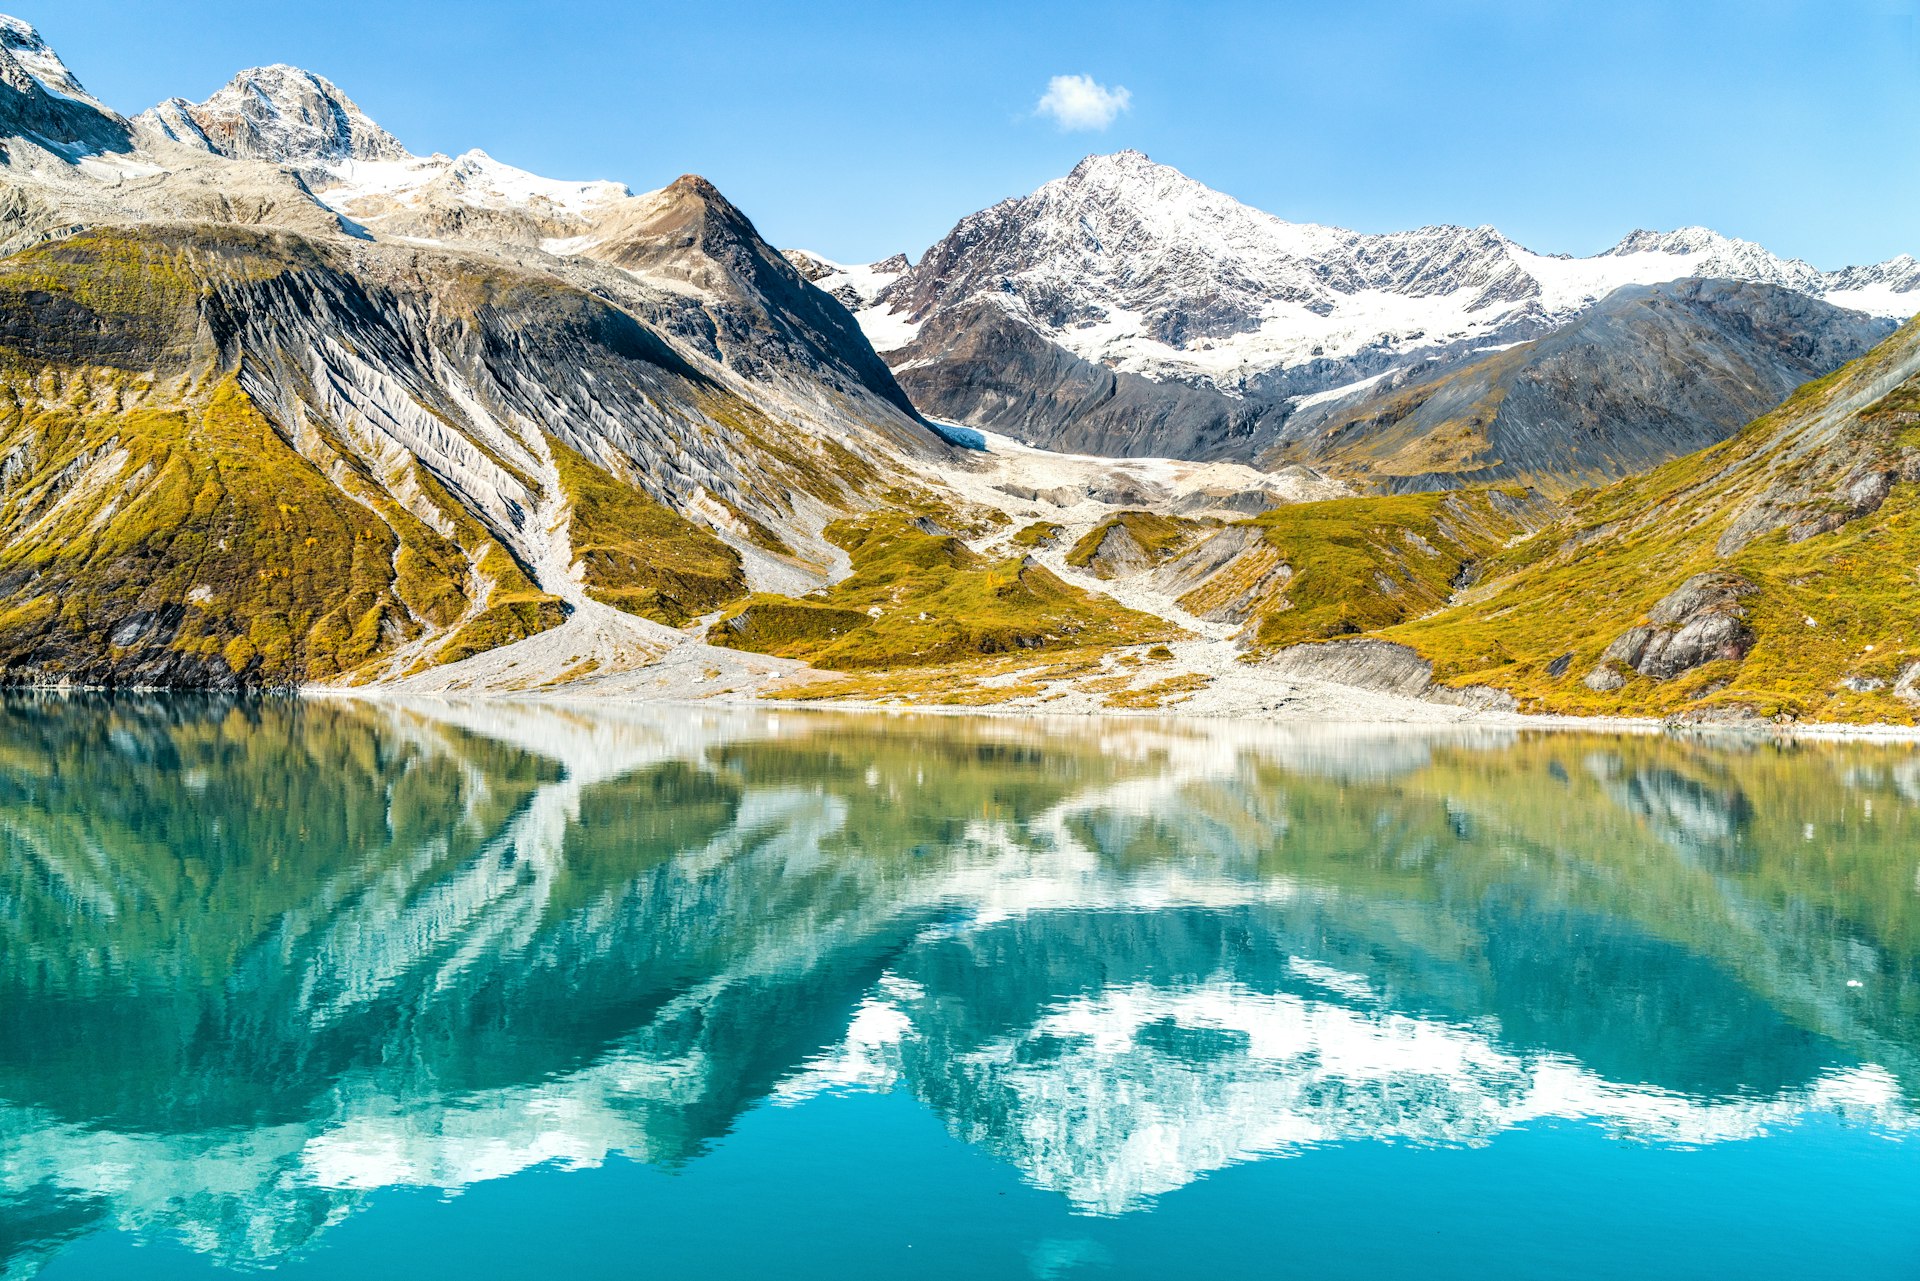 Amazing glacial landscape showing mountain peaks and glaciers on clear blue sky summer day. Mirror reflection of mountains in still glacial waters.